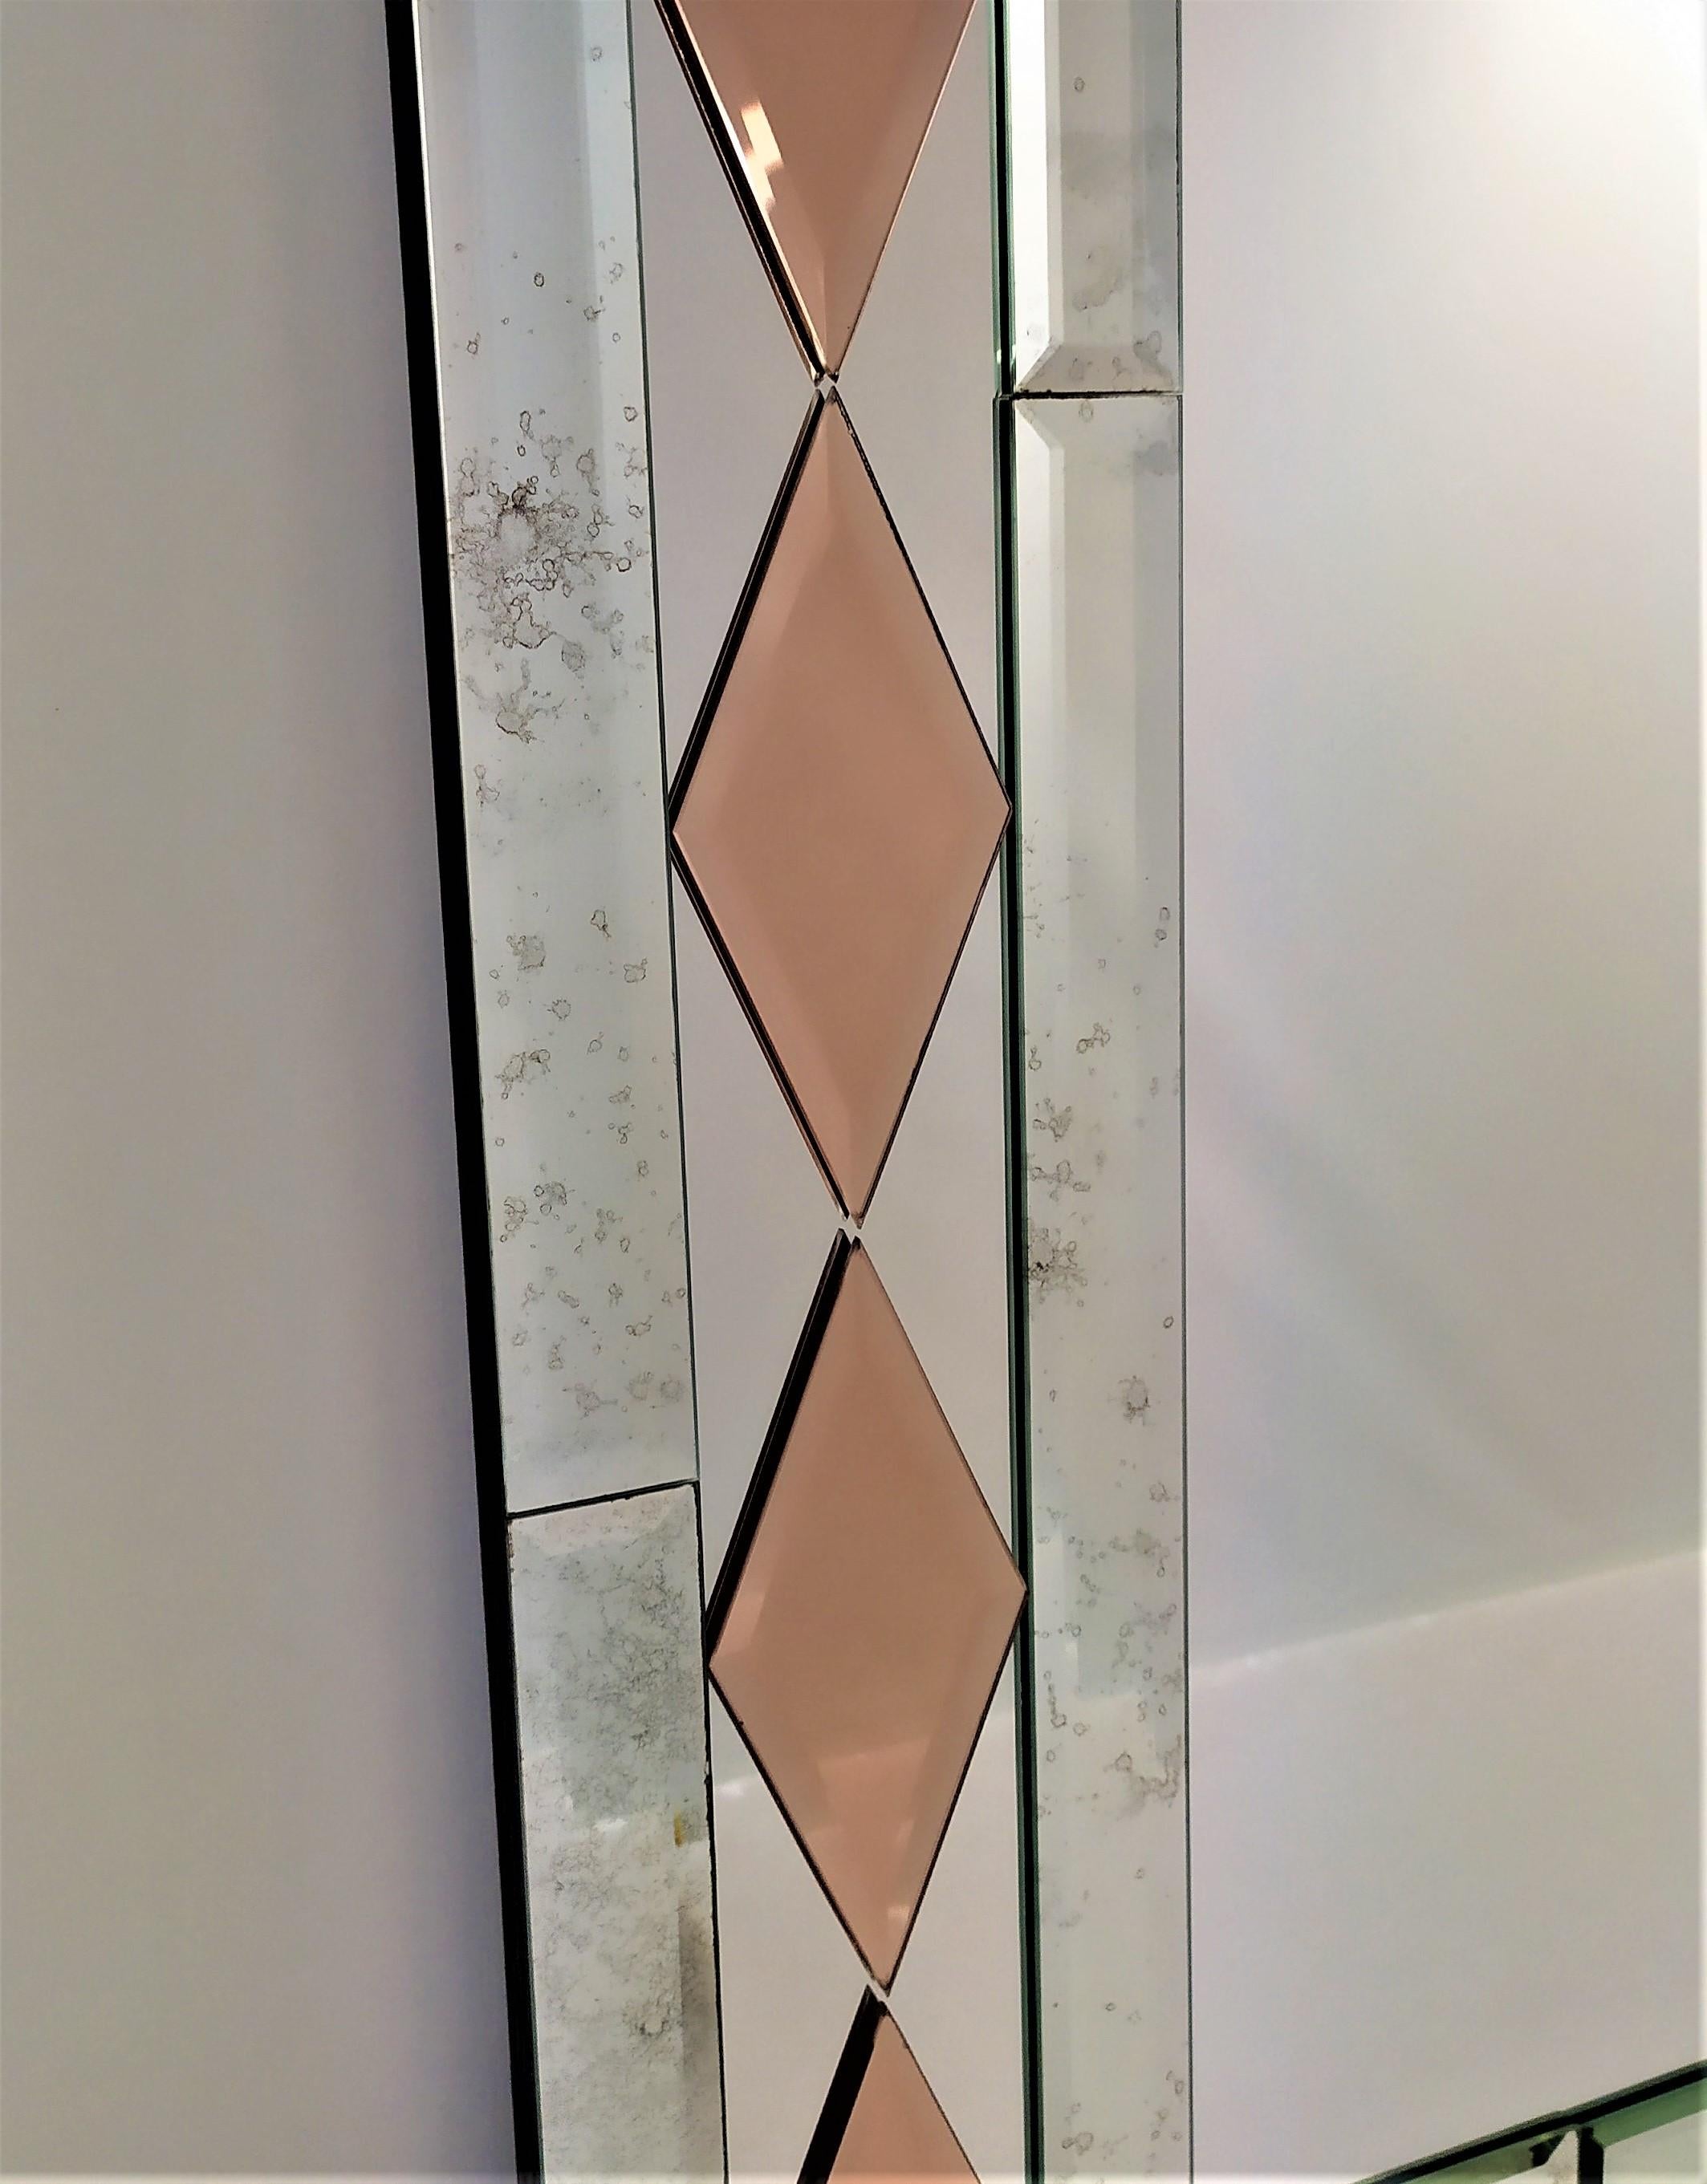 Rectangular Murano glass mirror, from the twenty-first century, composed of beveled and antiqued bands by hand, with the insert of pink crystal rhombuses faceted like diamonds all handmade, produced in a limited edition, to furnish luxurious homes